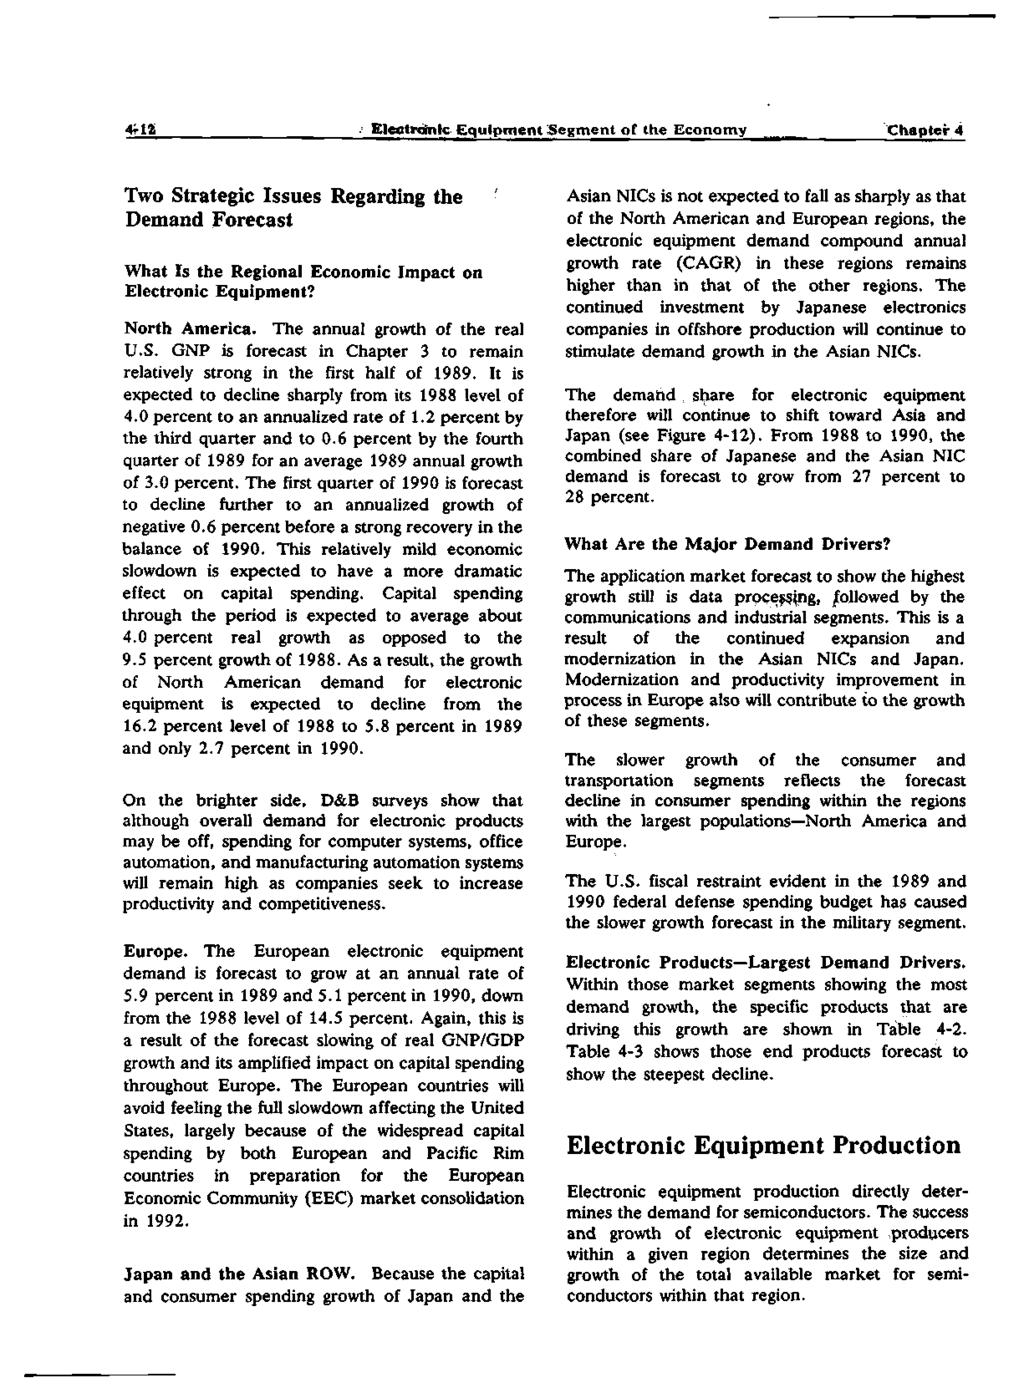 4rli Eleatrotntc Equipment Segment of the Economy Chapter 4 Two Strategic Issues Regarding the Demand Forecast What Is the Regional Economic Impact on Electronic Equipment? North America.